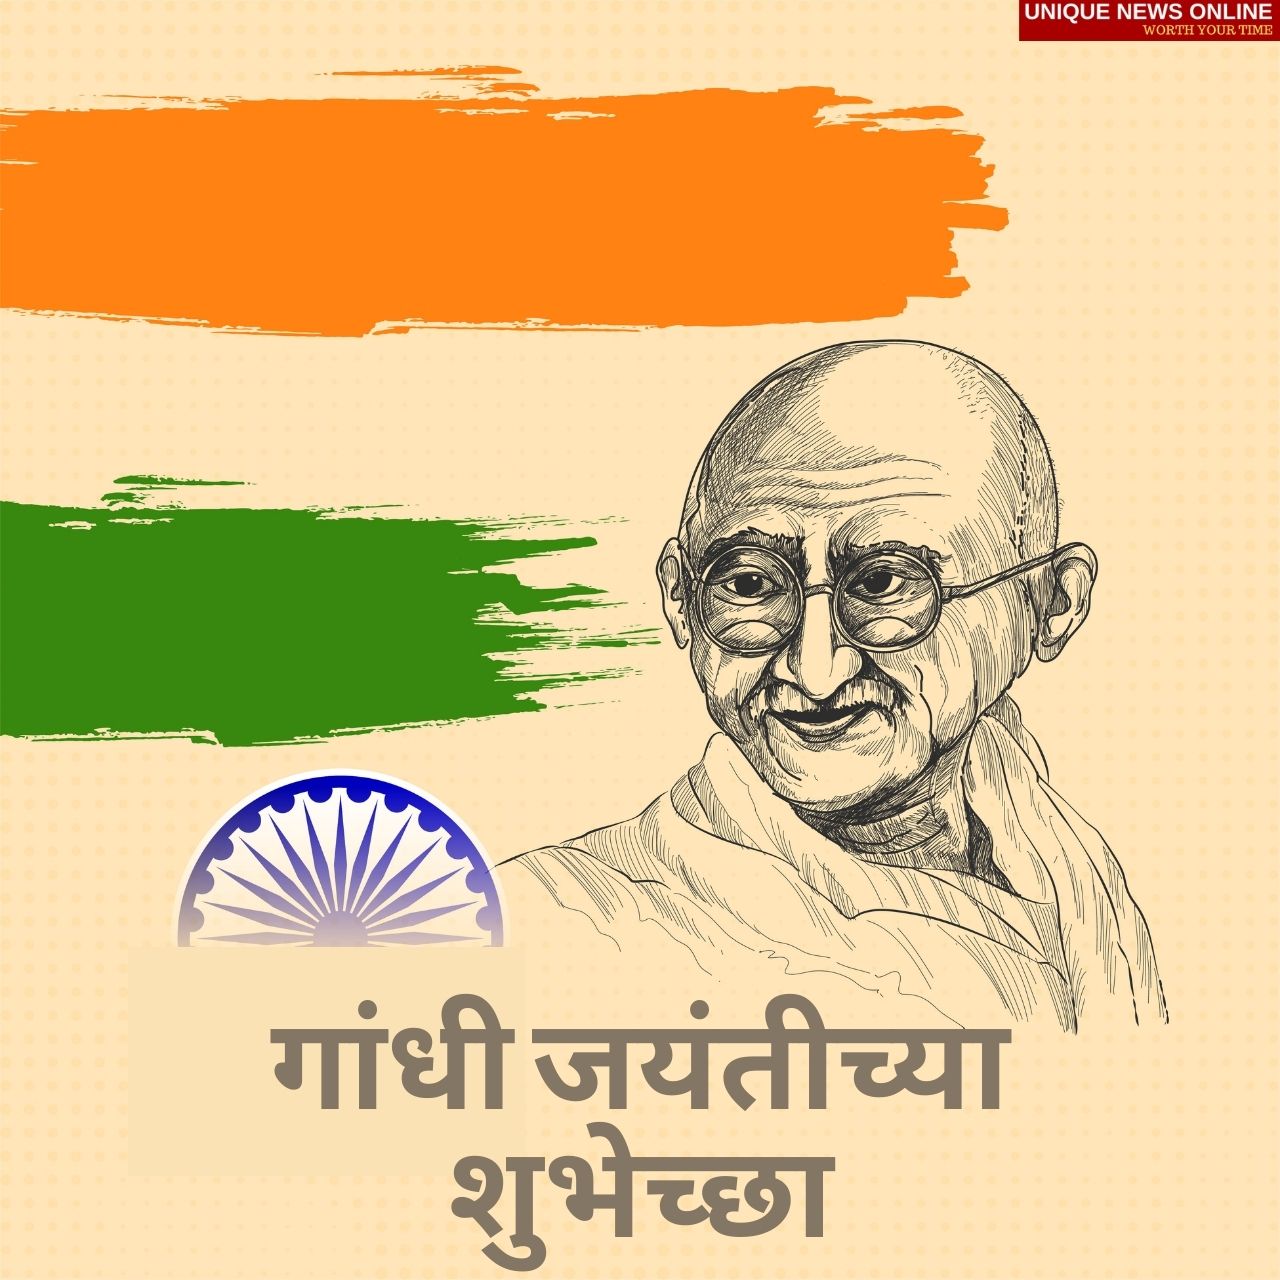 Gandhi Jayanti 2021 Marathi Wishes, Quotes, Messages, Wishes, Greetings, and HD Images to share